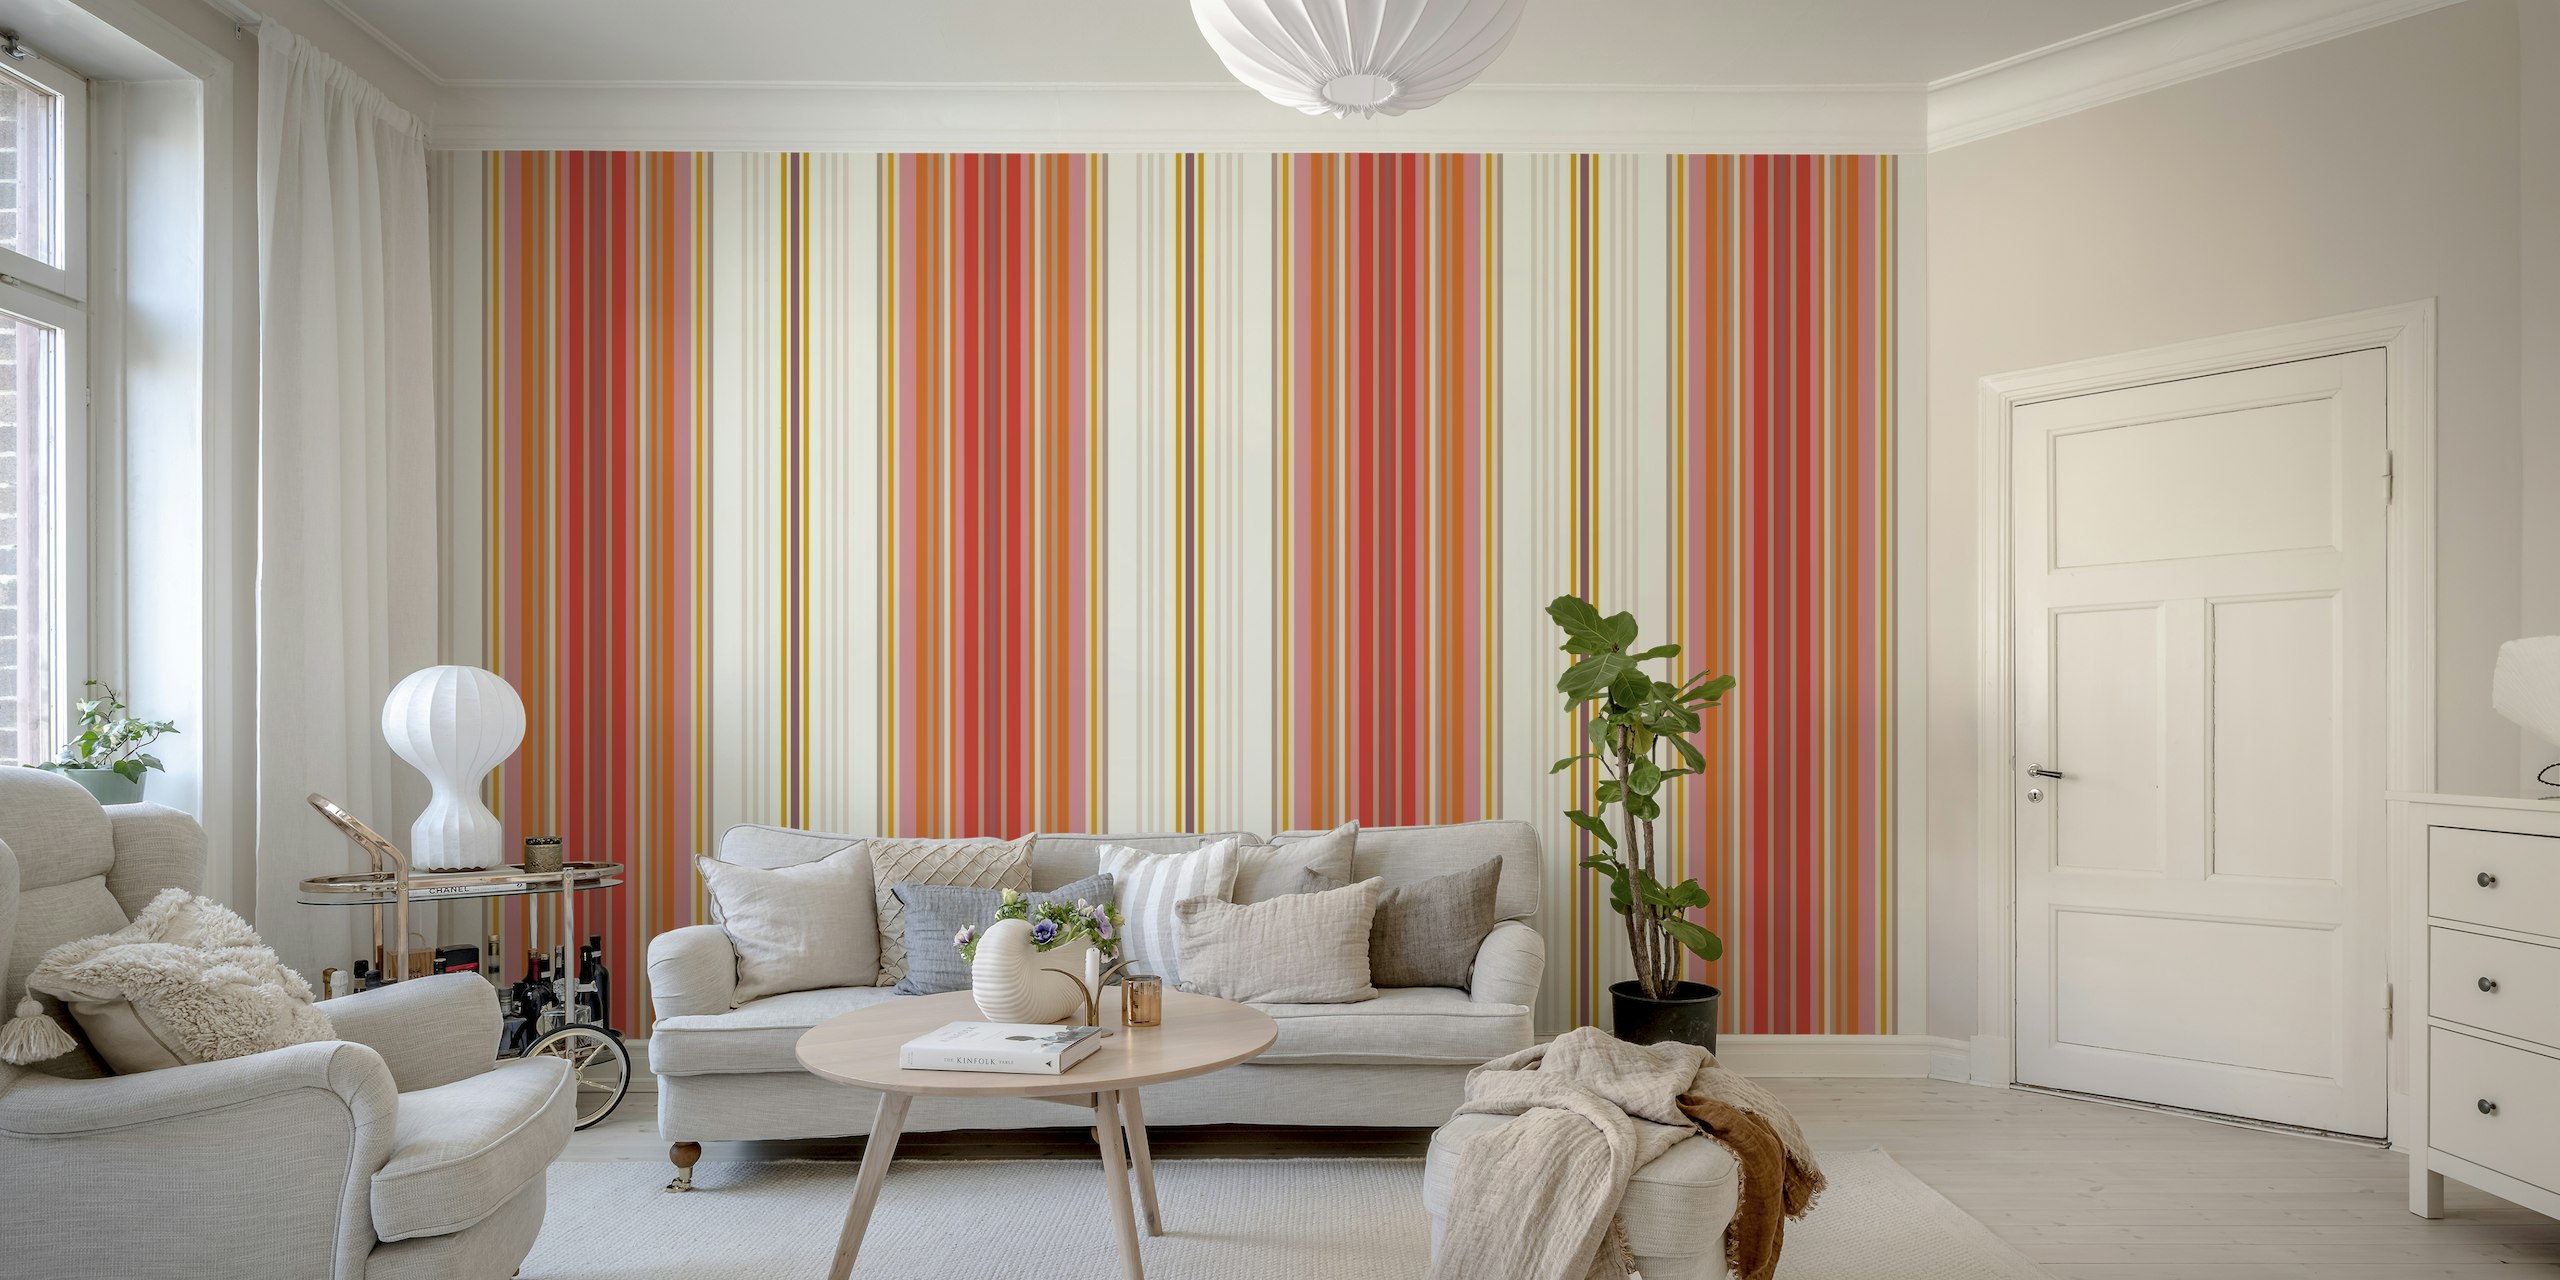 70s striped wallpaper - Red tapety